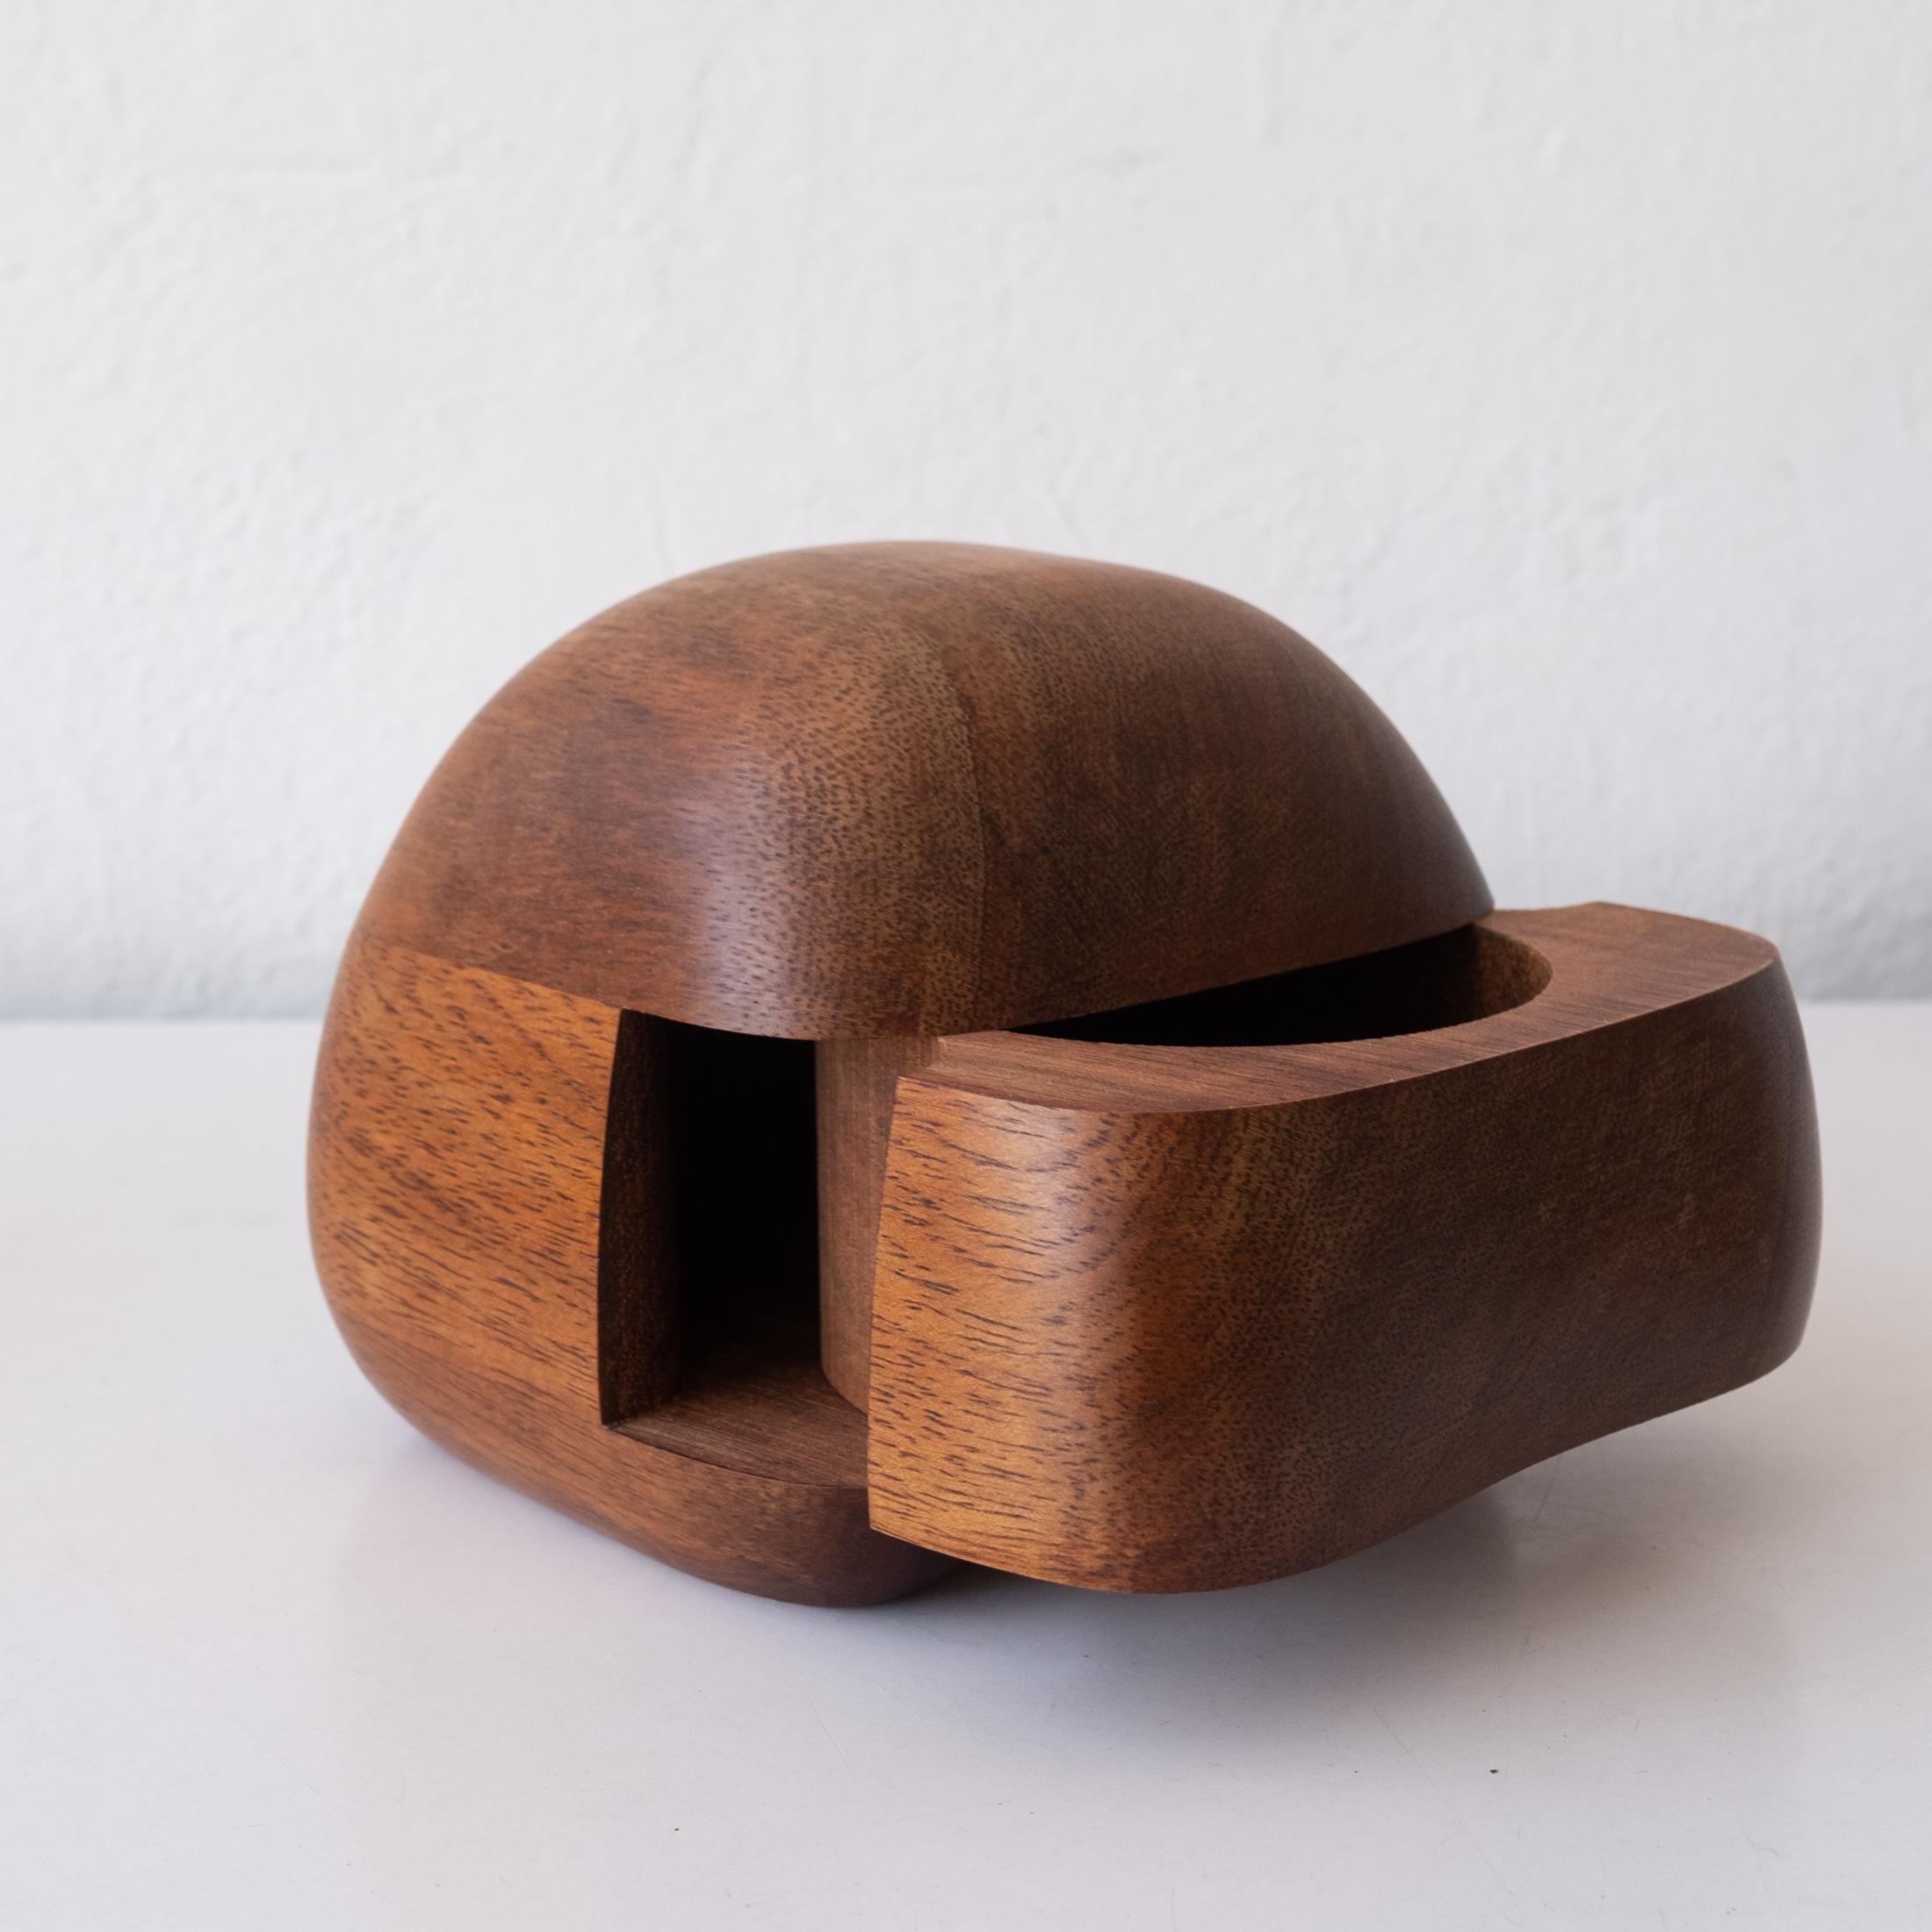 Studio Handcrafted Wood Jewelry Boxes by Dean Santner, 1970s For Sale 8